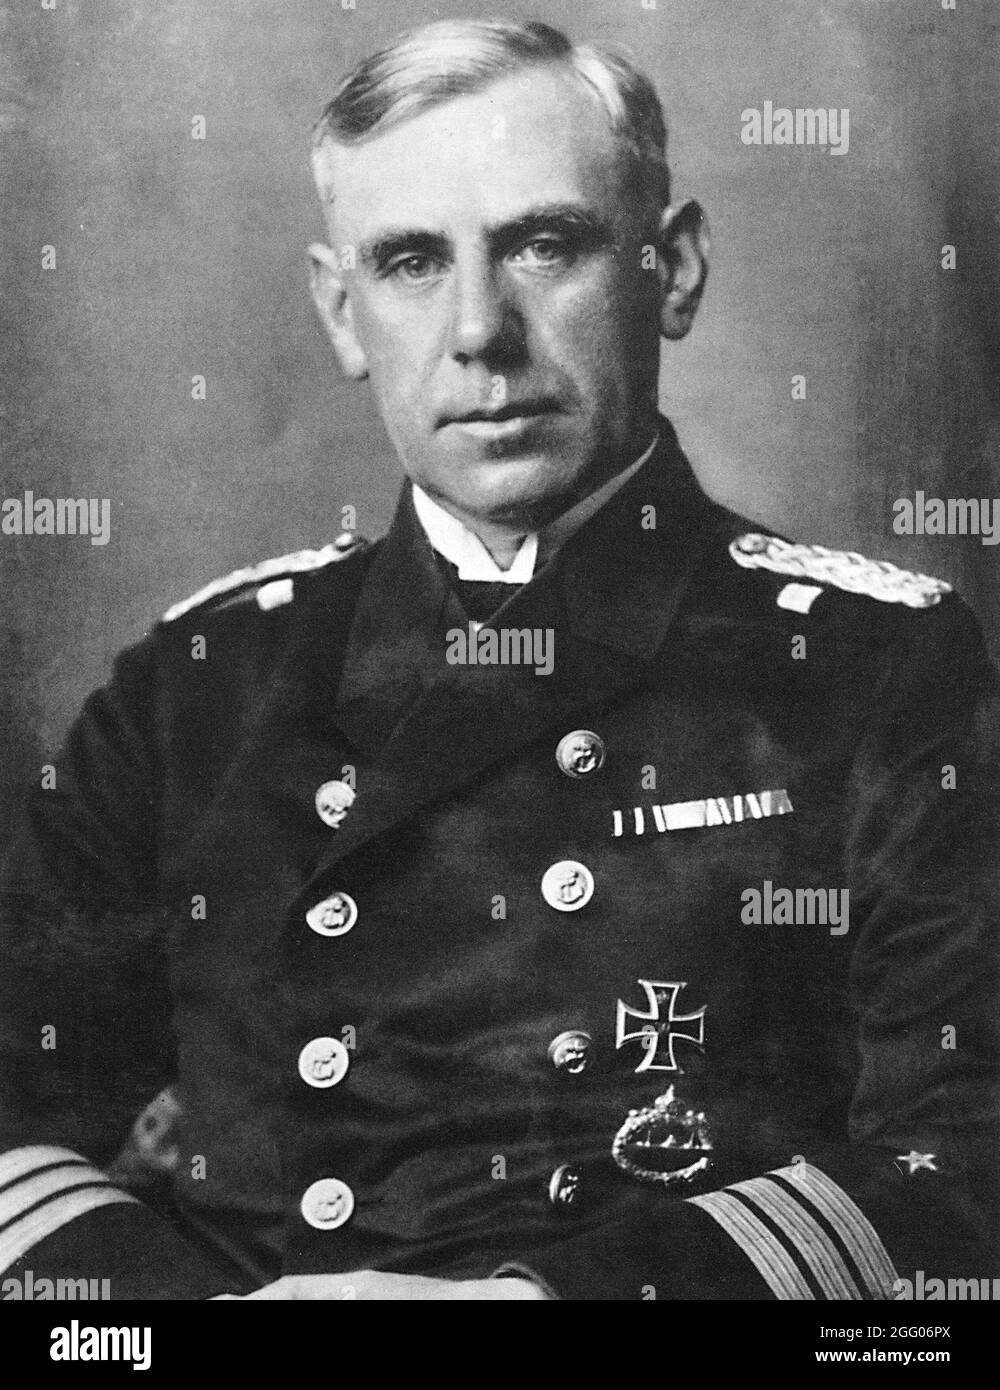 The head of the German military intelligence (Abwehr) Admiral Wilhem Canaris Stock Photo